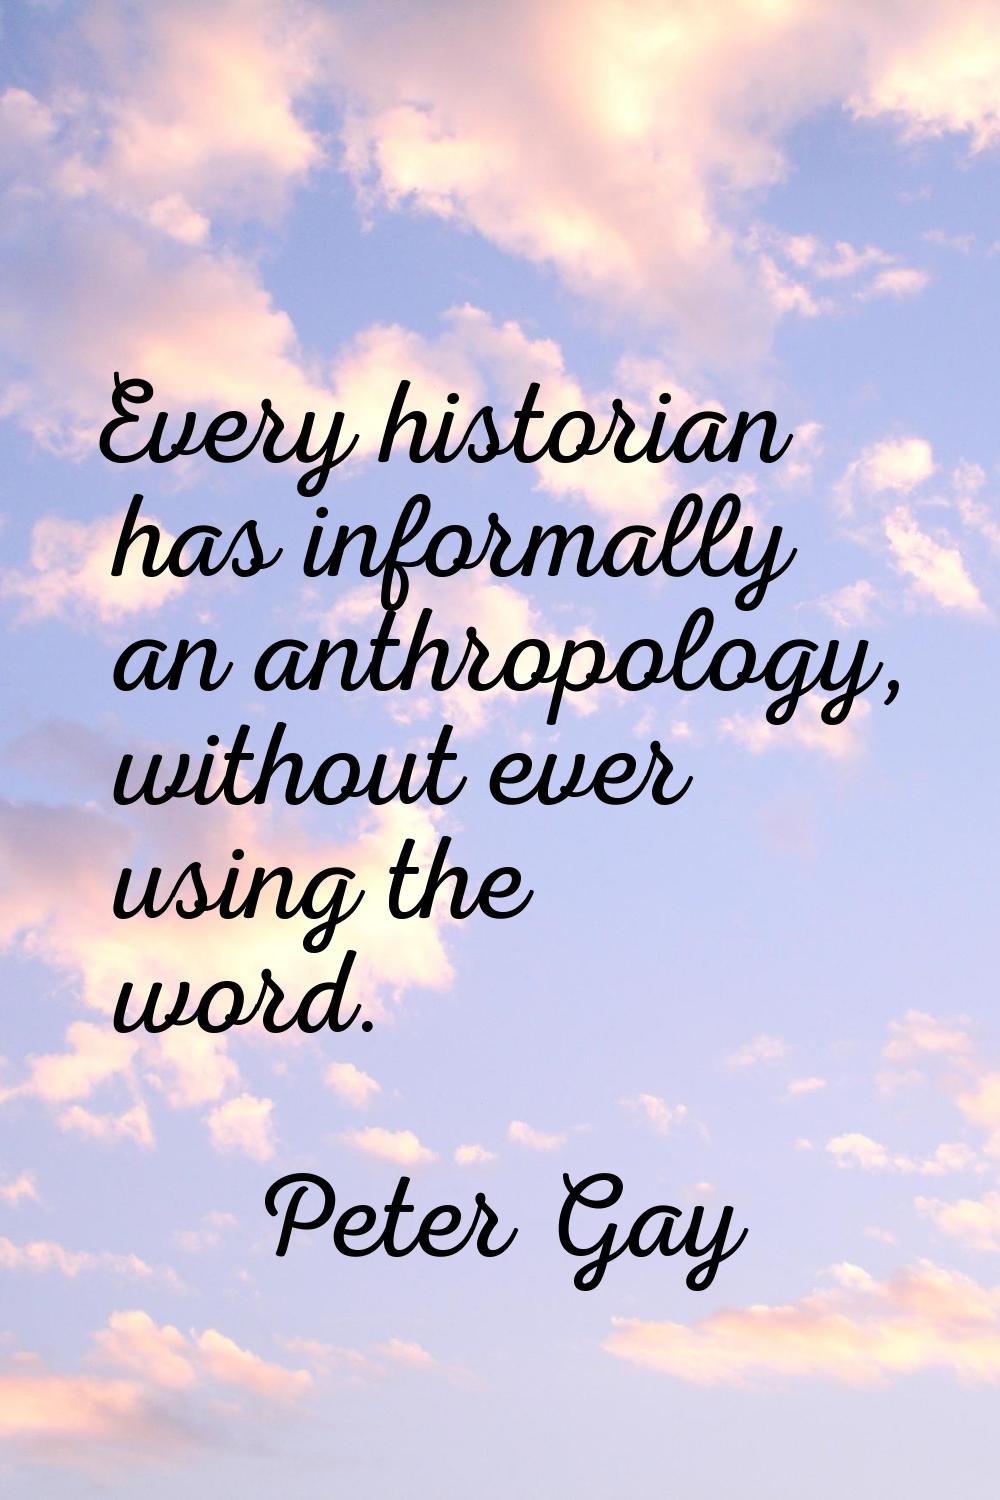 Every historian has informally an anthropology, without ever using the word.